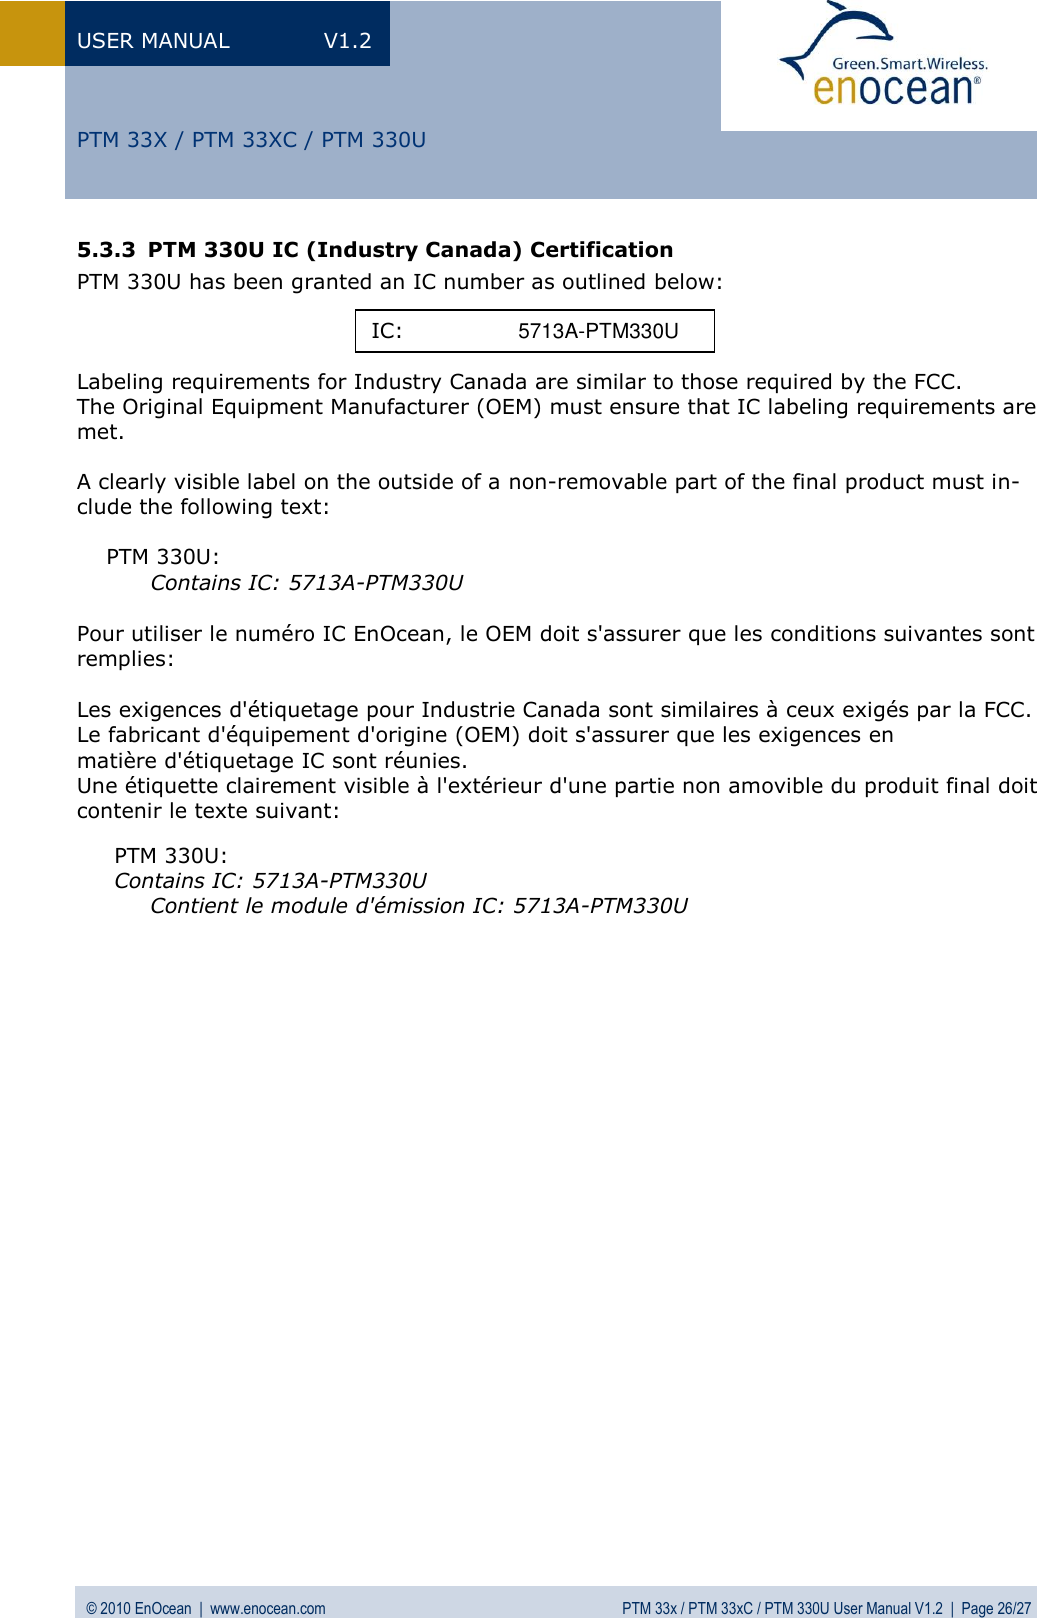 USER MANUAL  V1.2 © 2010 EnOcean  |  www.enocean.com  PTM 33x / PTM 33xC / PTM 330U User Manual V1.2  |  Page 26/27   PTM 33X / PTM 33XC / PTM 330U 5.3.3 PTM 330U IC (Industry Canada) Certification PTM 330U has been granted an IC number as outlined below:    Labeling requirements for Industry Canada are similar to those required by the FCC. The Original Equipment Manufacturer (OEM) must ensure that IC labeling requirements are met.   A clearly visible label on the outside of a non-removable part of the final product must in-clude the following text:  PTM 330U: Contains IC: 5713A-PTM330U   Pour utiliser le numéro IC EnOcean, le OEM doit s&apos;assurer que les conditions suivantes sont remplies:  Les exigences d&apos;étiquetage pour Industrie Canada sont similaires à ceux exigés par la FCC. Le fabricant d&apos;équipement d&apos;origine (OEM) doit s&apos;assurer que les exigences en  matière d&apos;étiquetage IC sont réunies.  Une étiquette clairement visible à l&apos;extérieur d&apos;une partie non amovible du produit final doit contenir le texte suivant:  PTM 330U: Contains IC: 5713A-PTM330U    Contient le module d&apos;émission IC: 5713A-PTM330U   IC:    5713A-PTM330U 